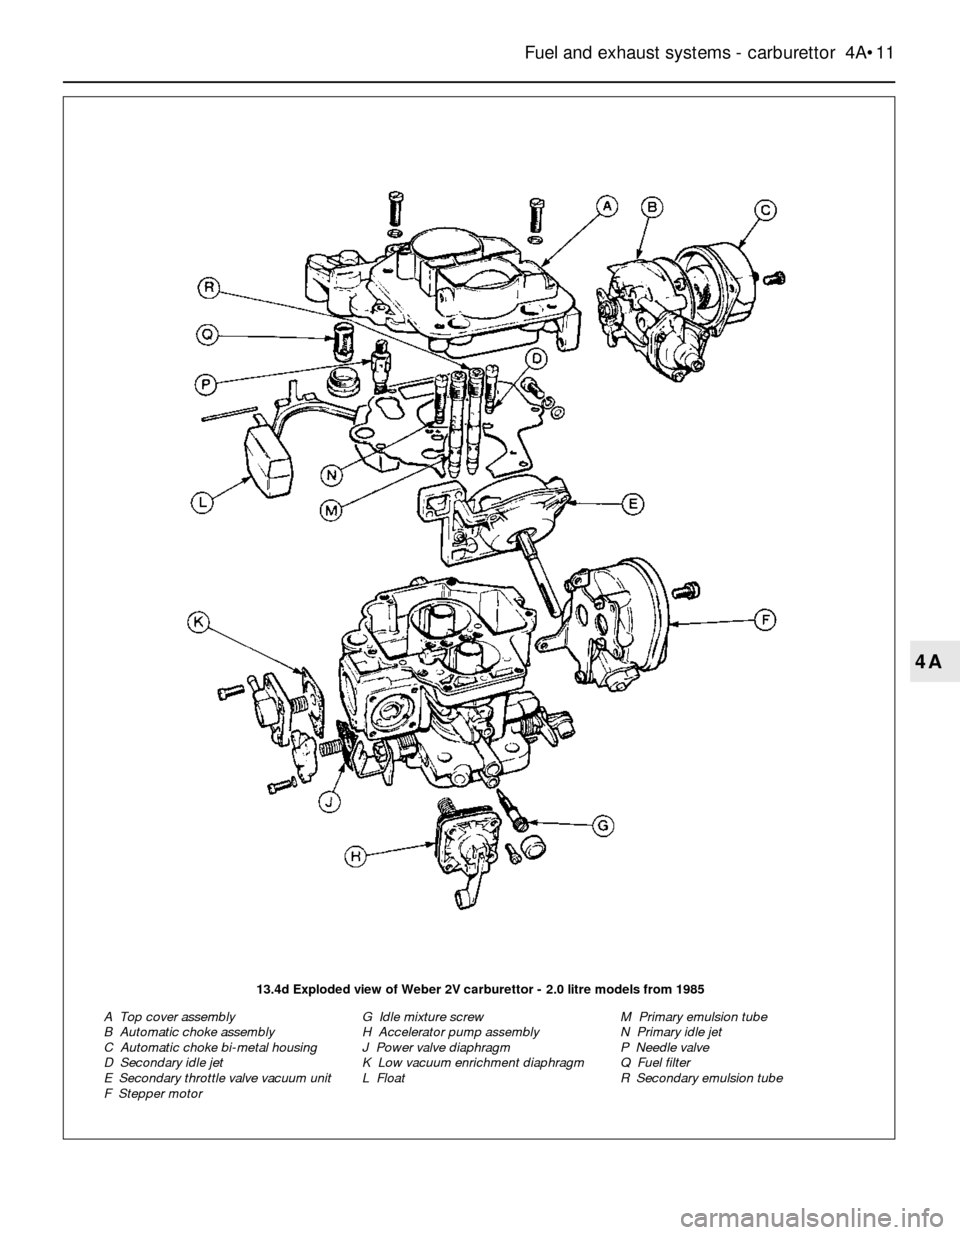 FORD SIERRA 1985 1.G Fuel And Exhaust Systems Carburettor Workshop Manual Fuel and exhaust systems - carburettor  4A•11
4A
13.4d Exploded view of Weber 2V carburettor - 2.0 litre models from 1985
A  Top cover assembly
B  Automatic choke assembly
C  Automatic choke bi-meta